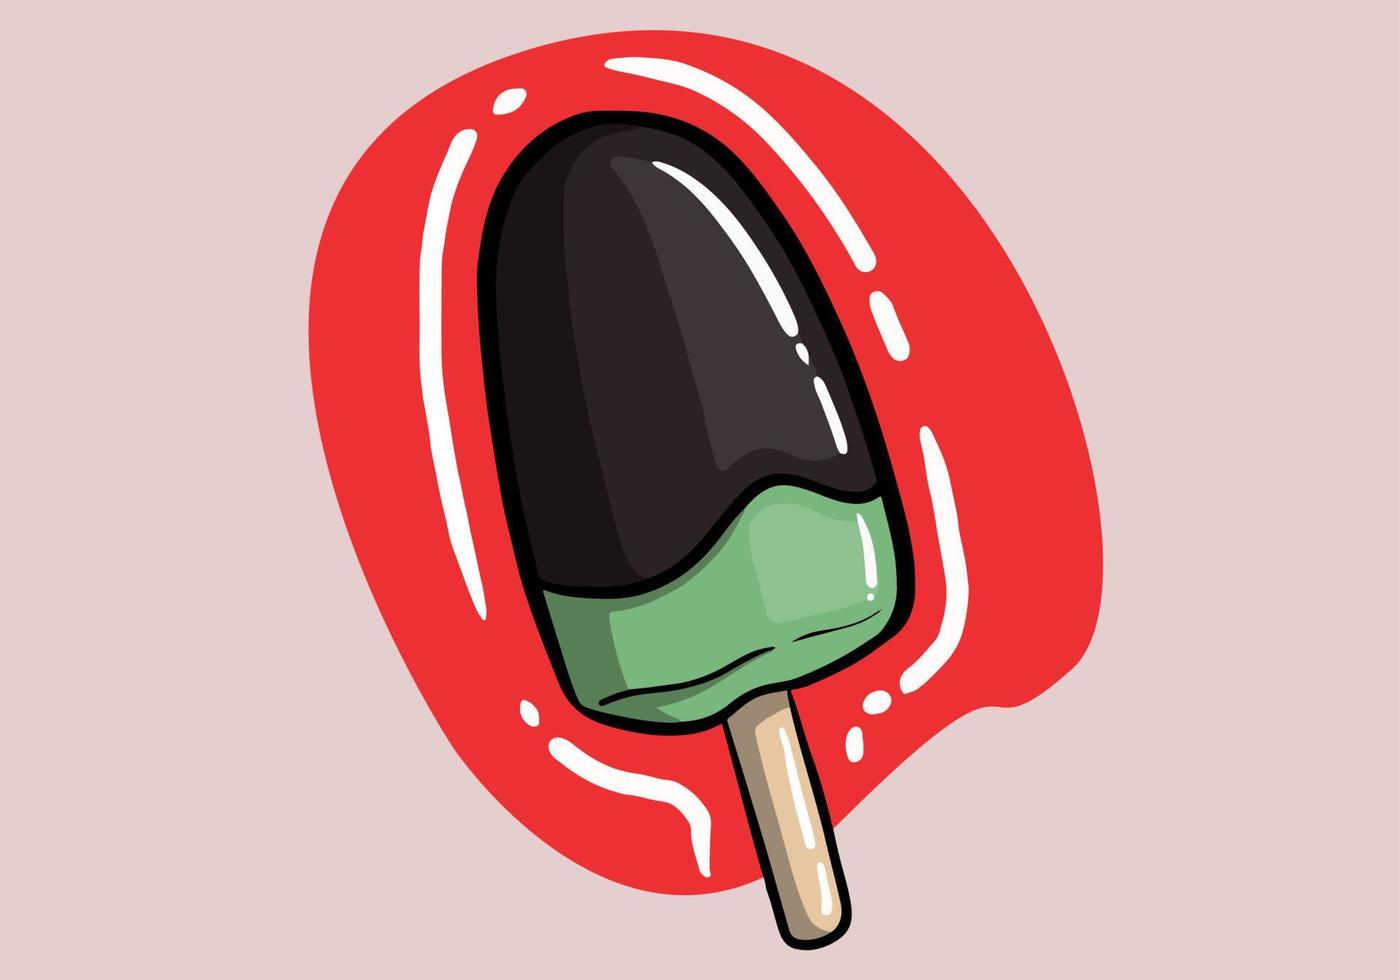 Whole and bitten ice cream hand drawn vector illustration. Popsicles covered chocolate with wooden stick isolated on background.